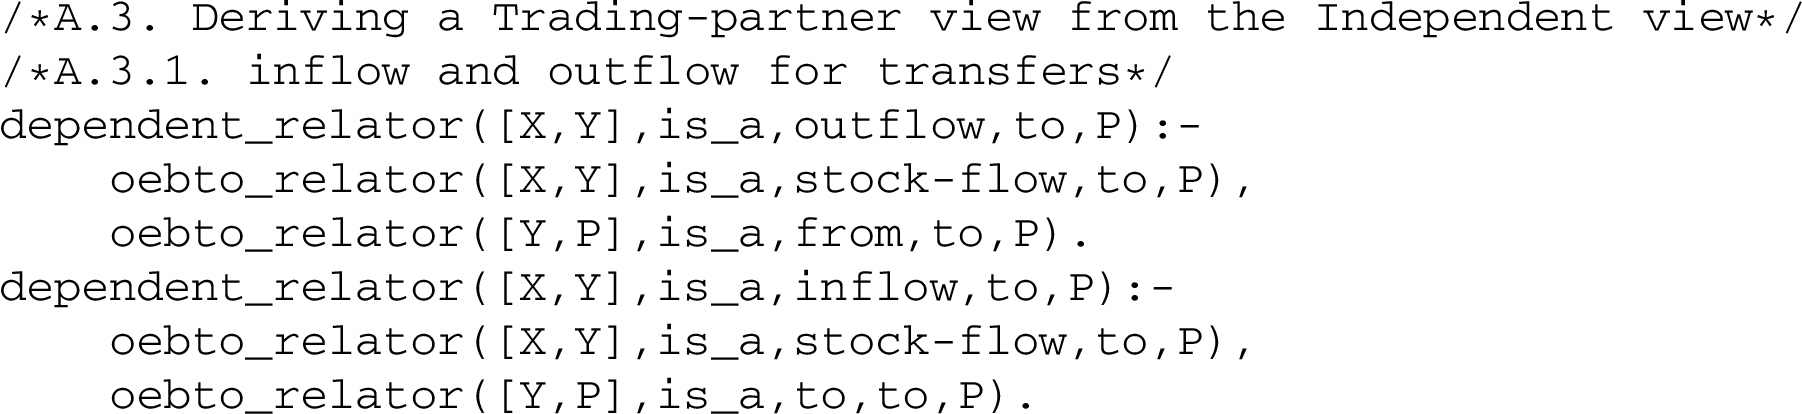 Derives inflow and outflow relators from to and from semantics.